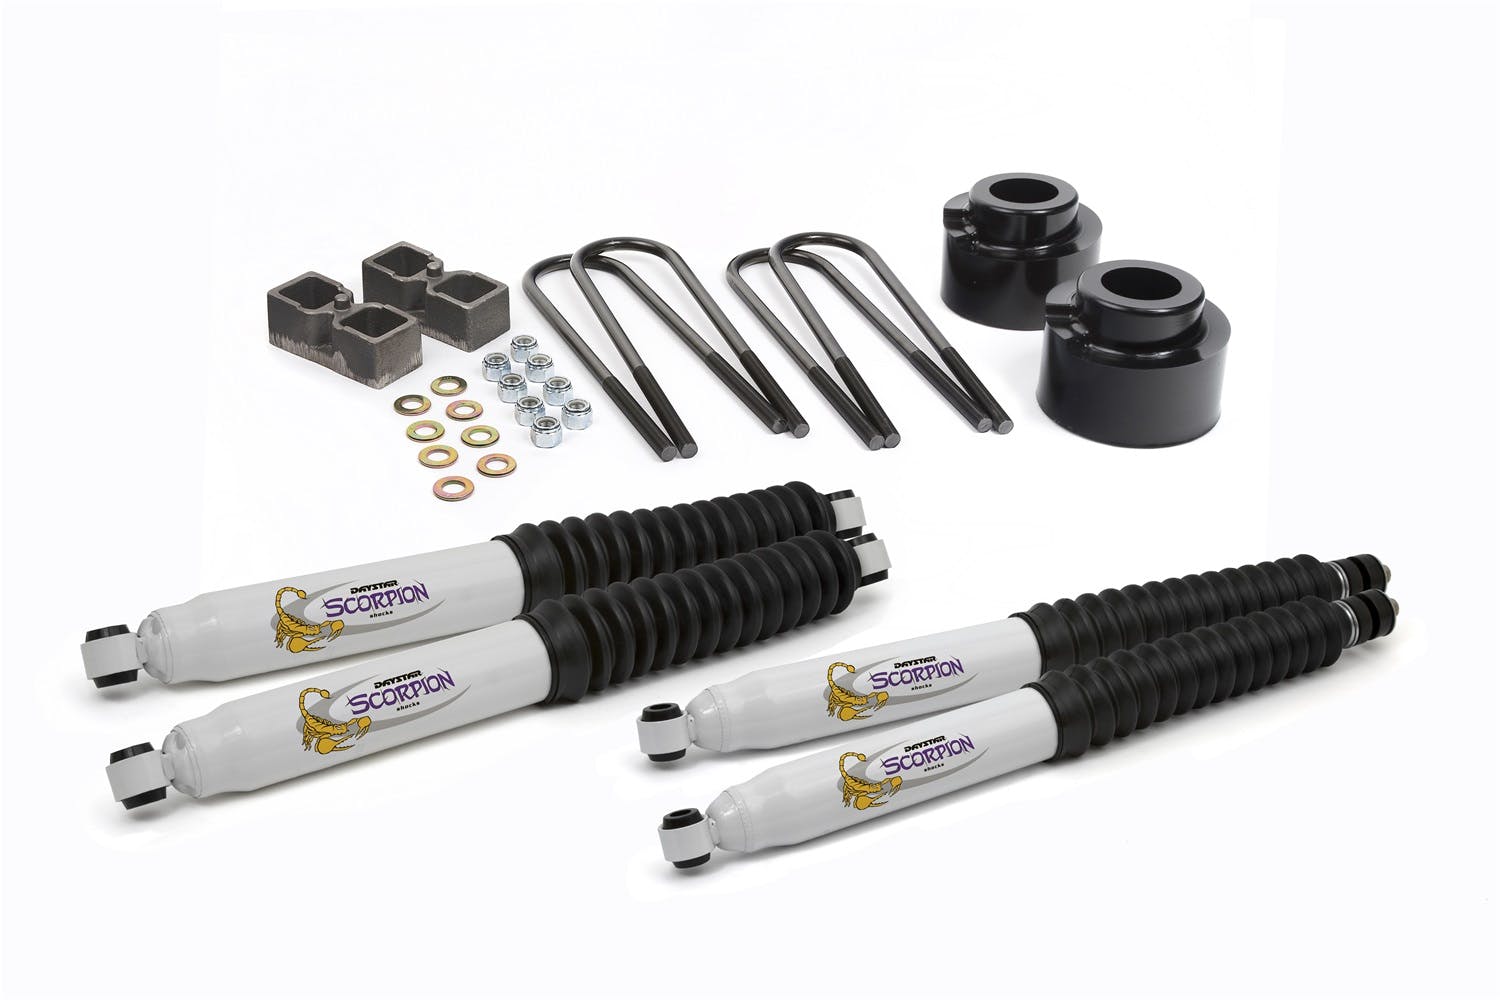 Daystar KF09052BK Suspension Lift Kit; 2.5 inch Front Coil Spring Spacers; 2 inch Rear Lift Blocks